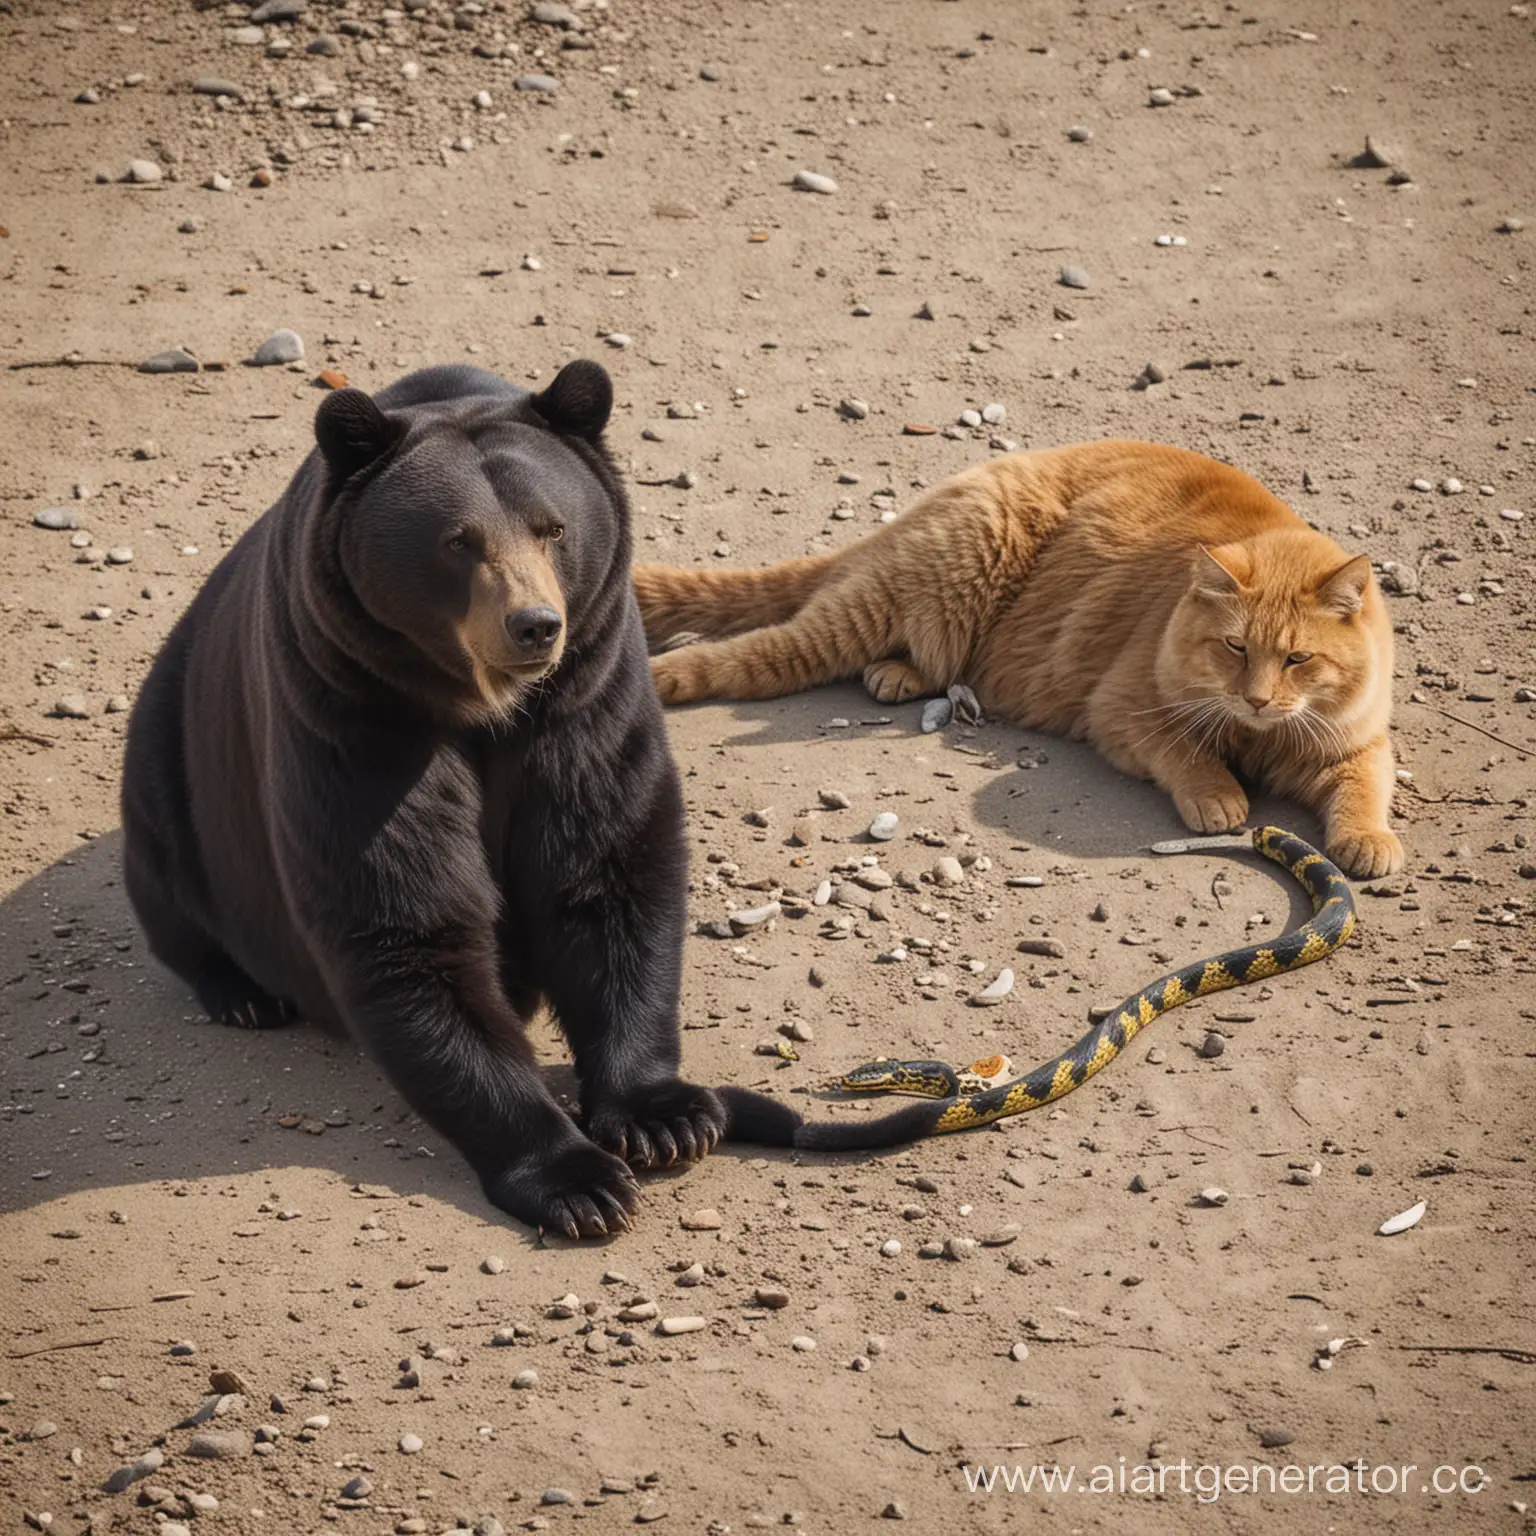 Bear-Cat-and-Snake-Together-in-Natural-Harmony